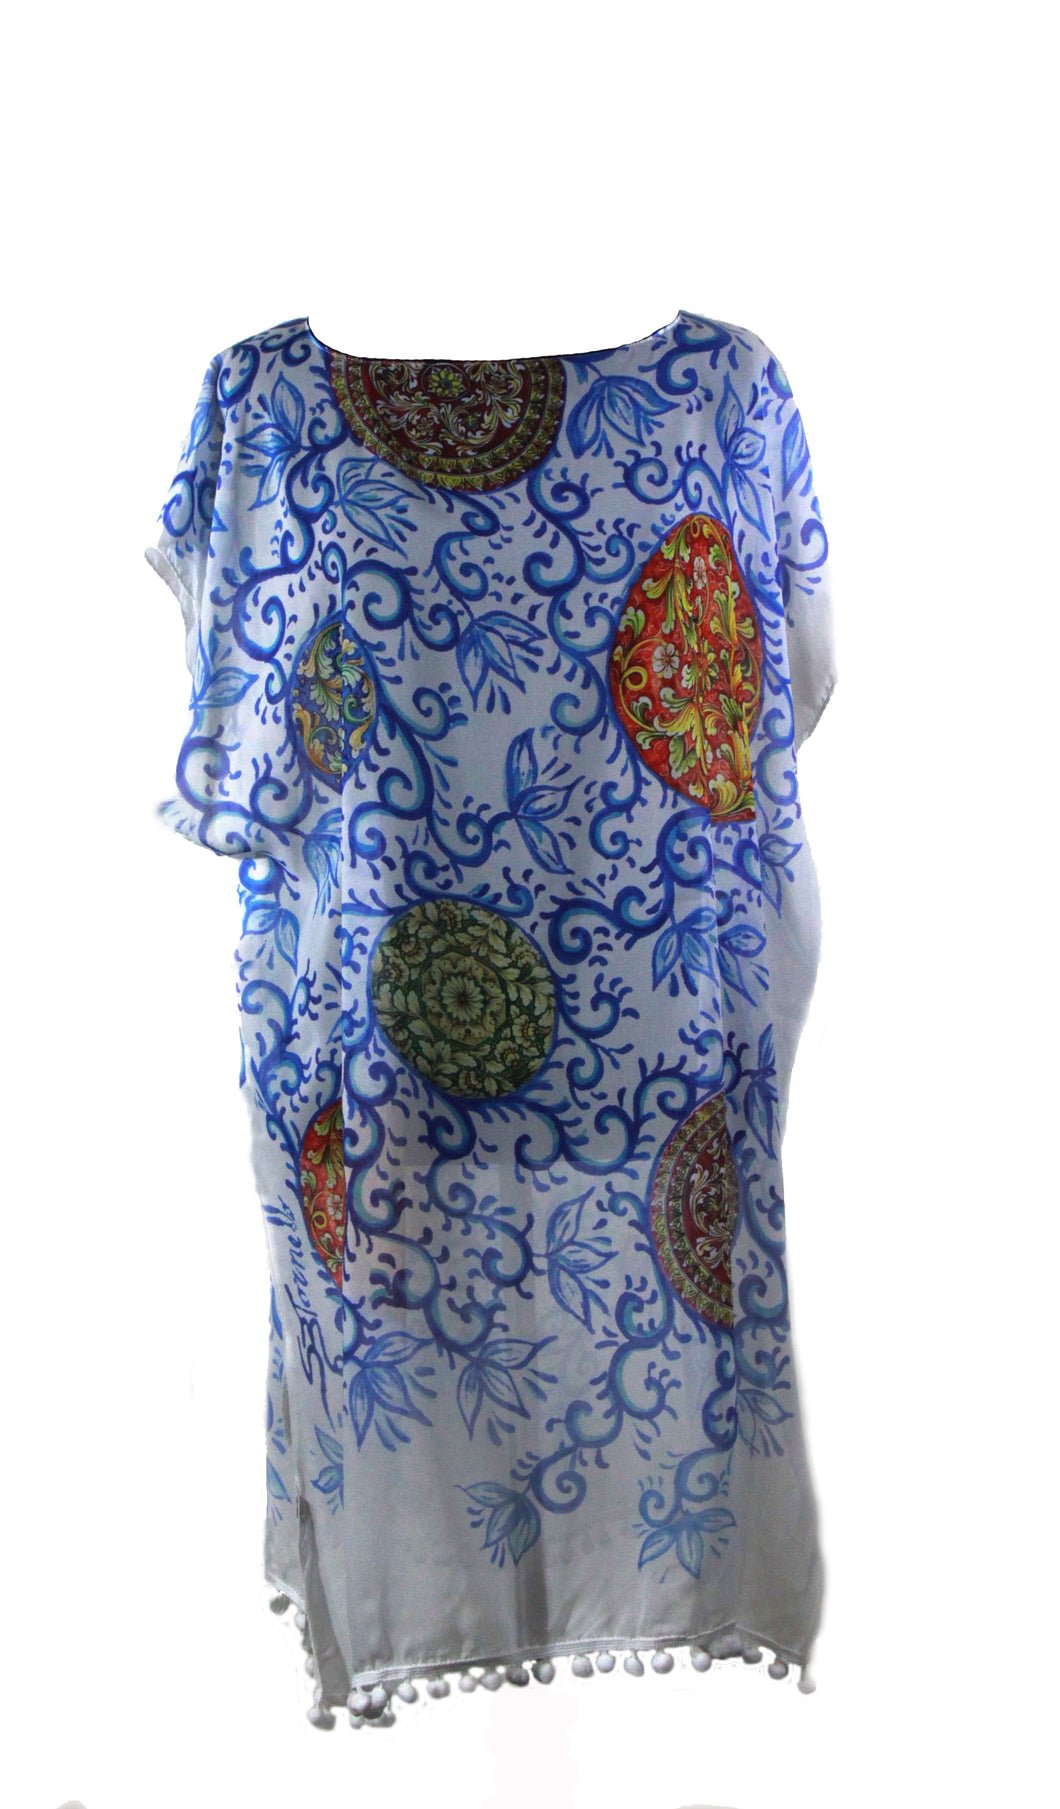 KAFTAN FOR WOMEN WITH CALTAGIRONE'S PLATES (LIGHT BLUE) IN CHIFFON SILK WITH ARTISTIC PRINTS THAT COME FROM PAINTINGS.